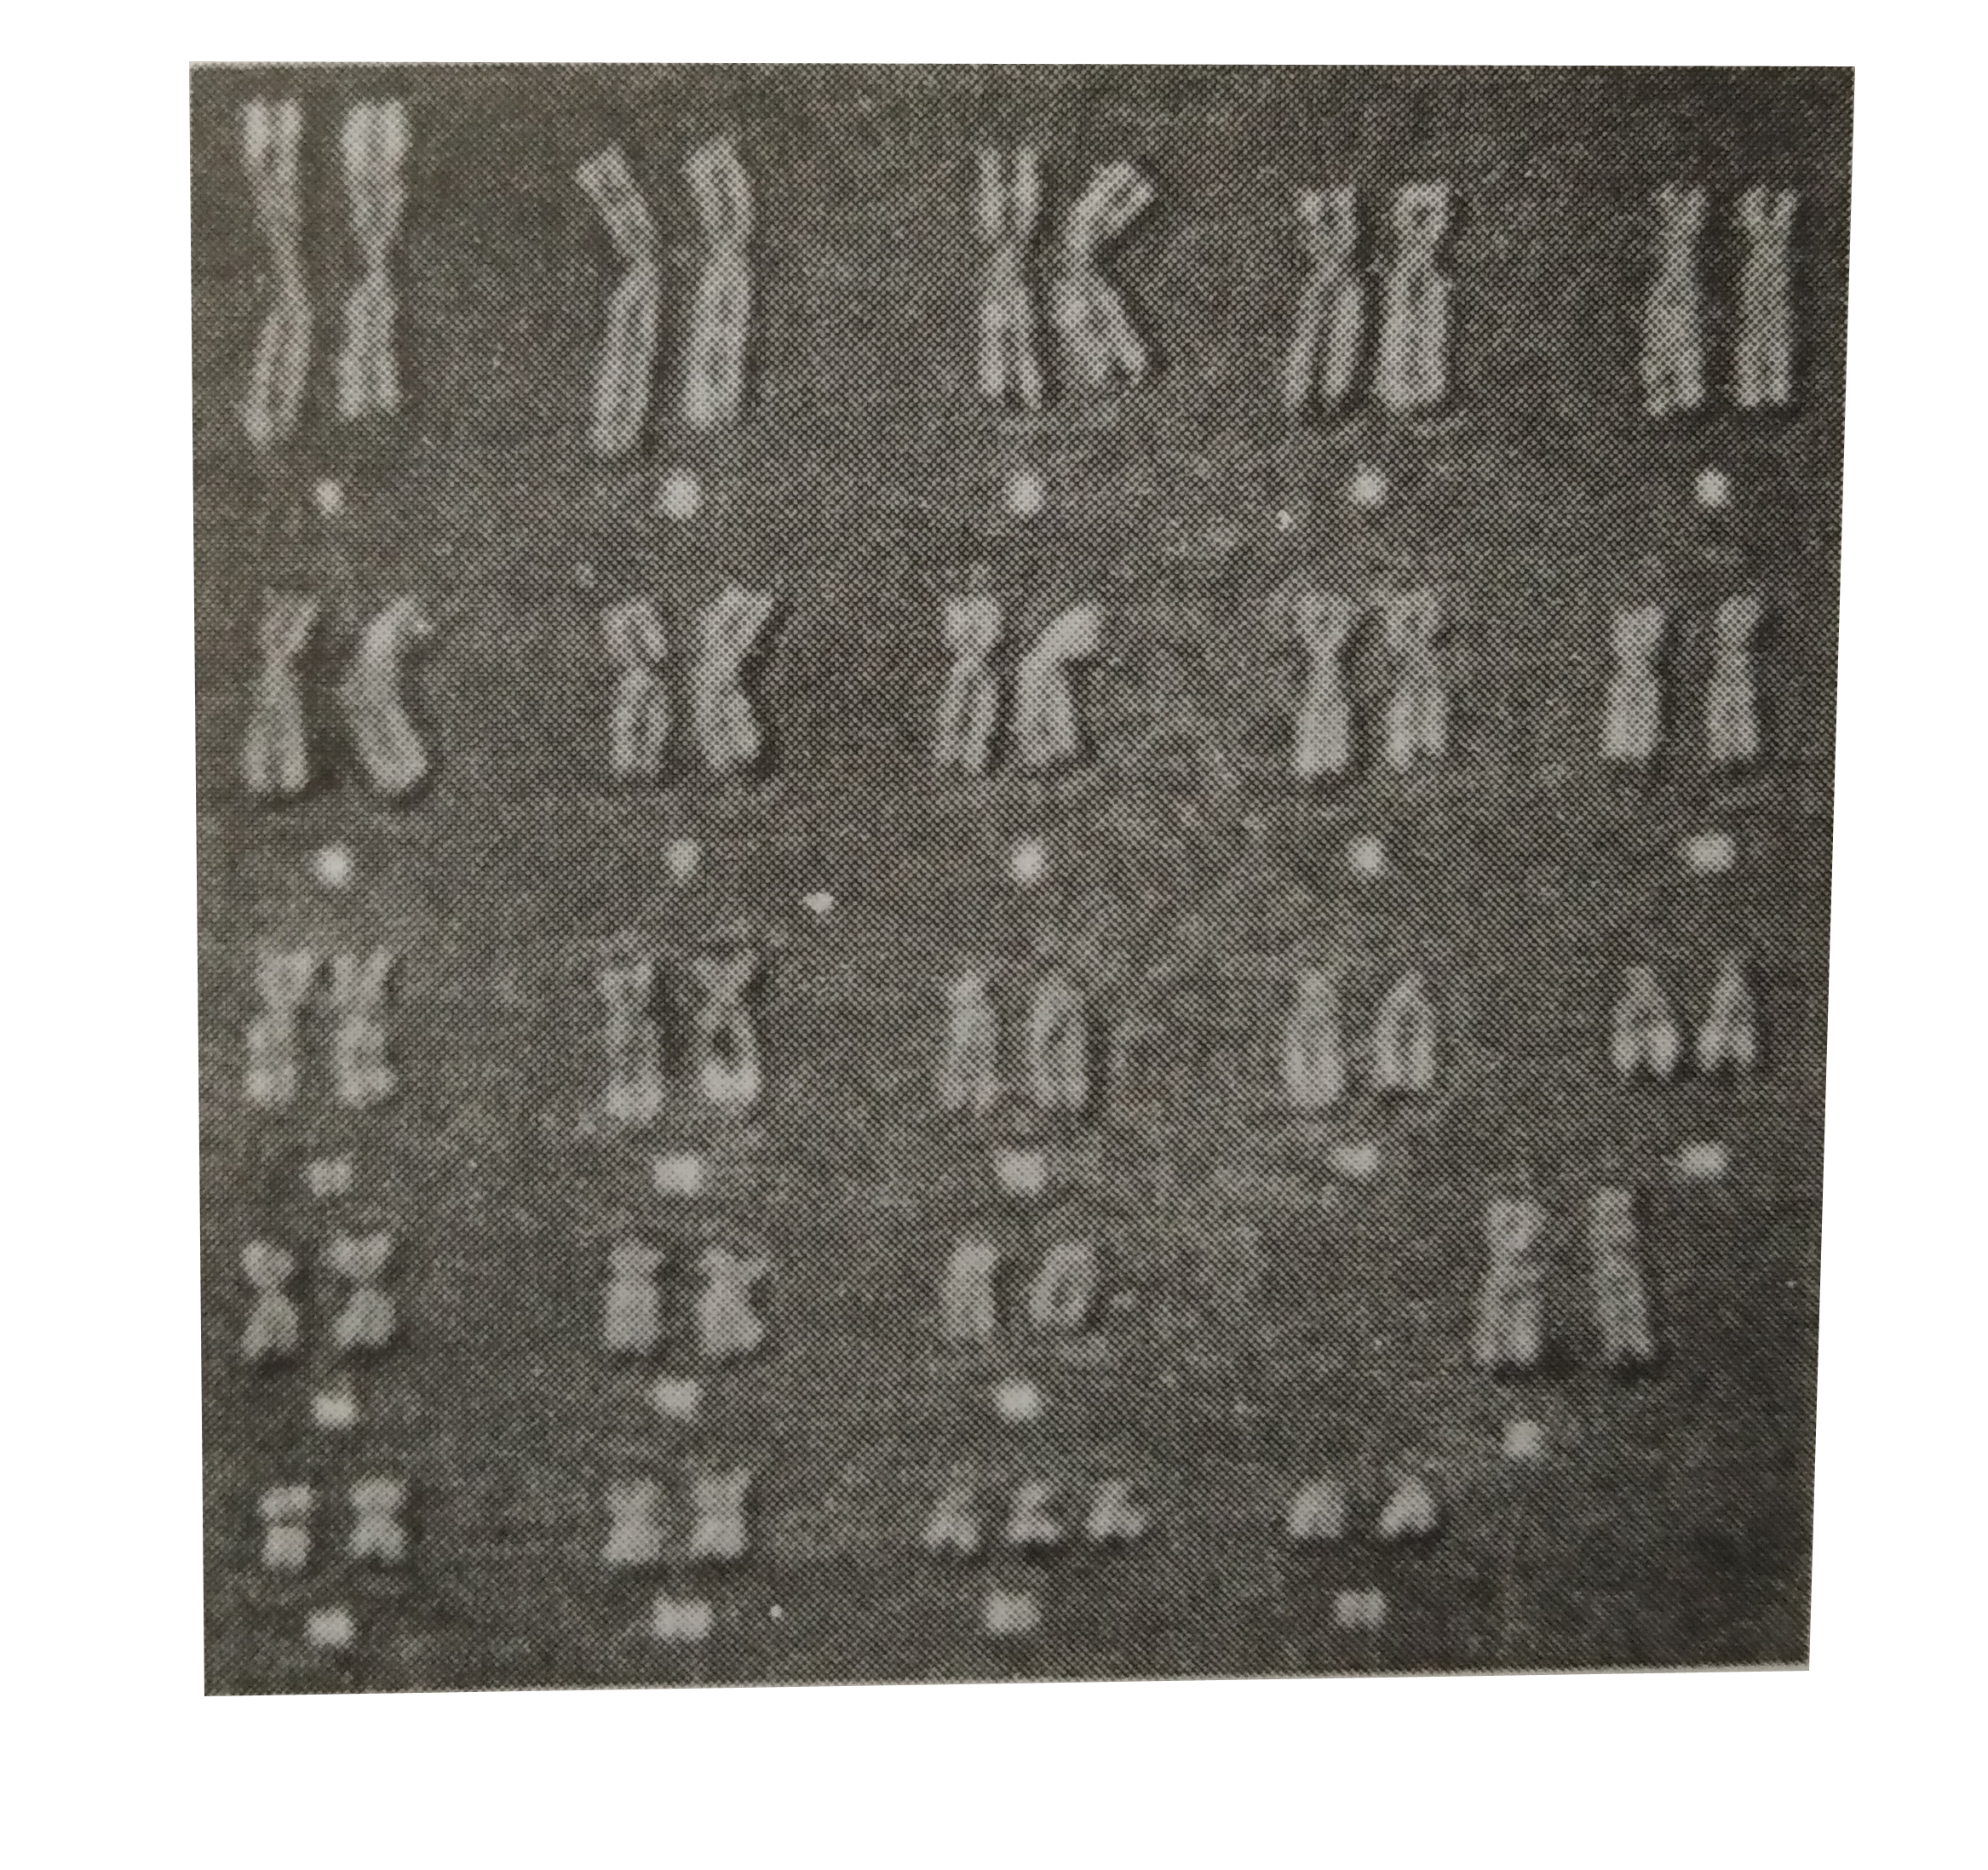 The chromosomal pattern of individual is shown here.    This individual is suffering from